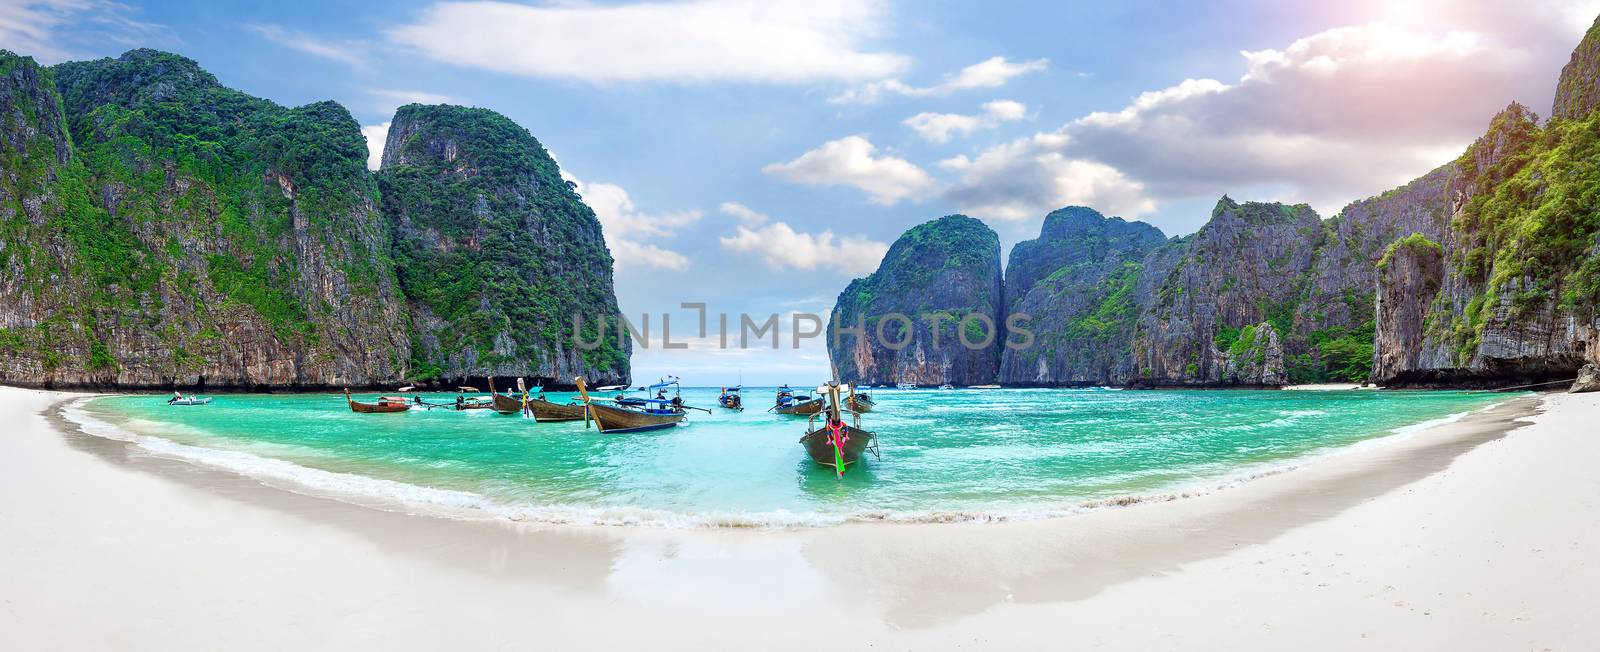 Panorama of Long boat and blue water at Maya bay in Phi Phi Island, Krabi Thailand. by gutarphotoghaphy